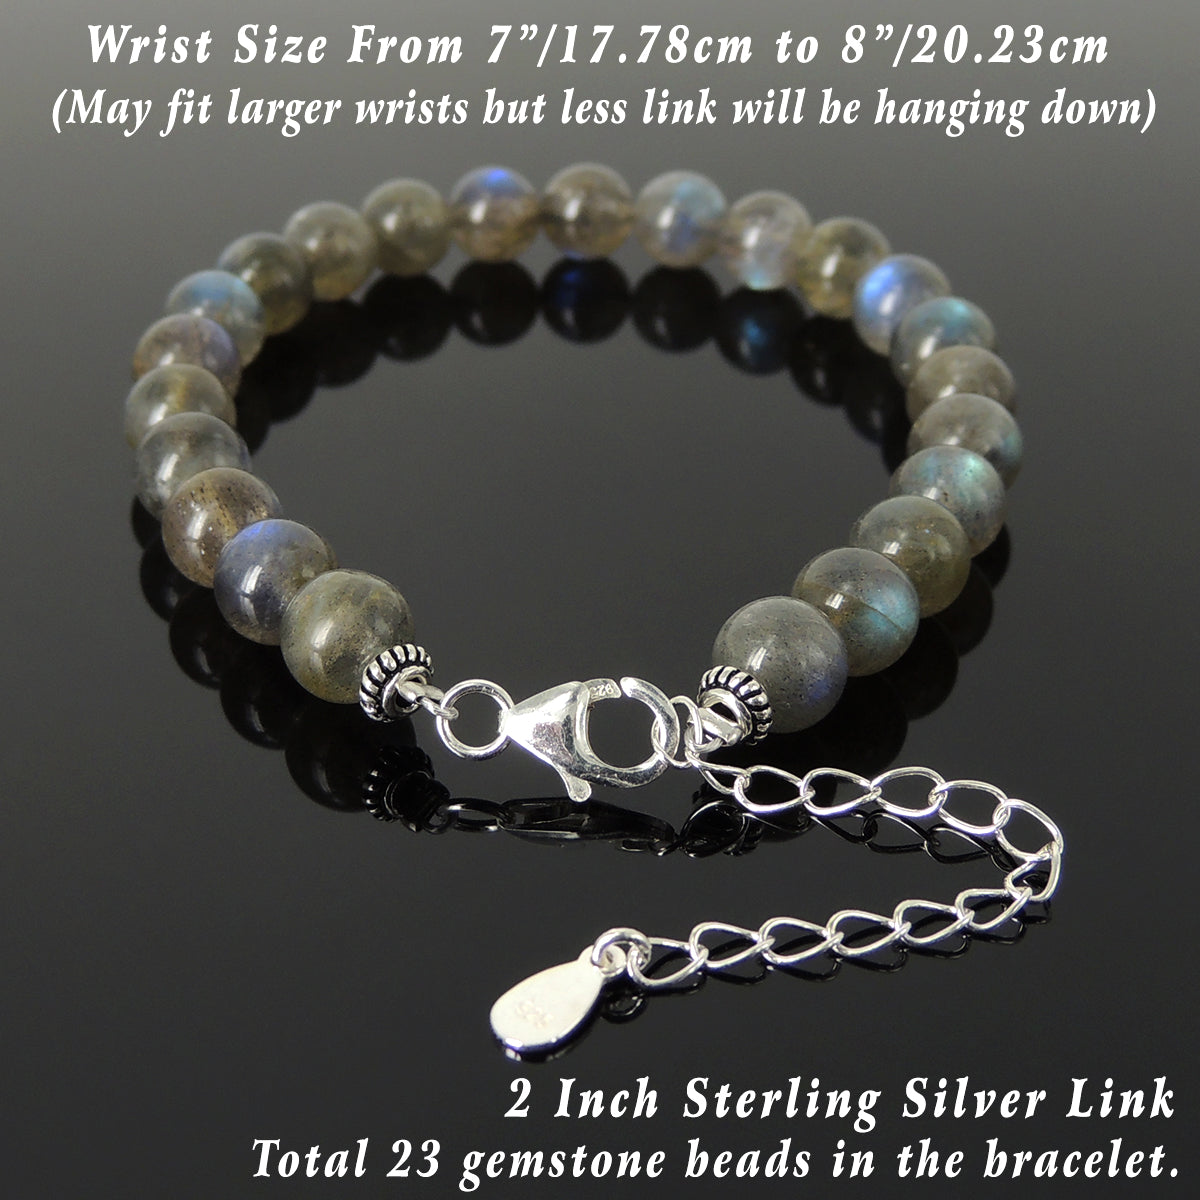 8mm Multicolor Labradorite Healing Gemstone Bracelet with S925 Sterling Silver Beads, Chain, & Clasp - Handmade by Gem & Silver BR1359